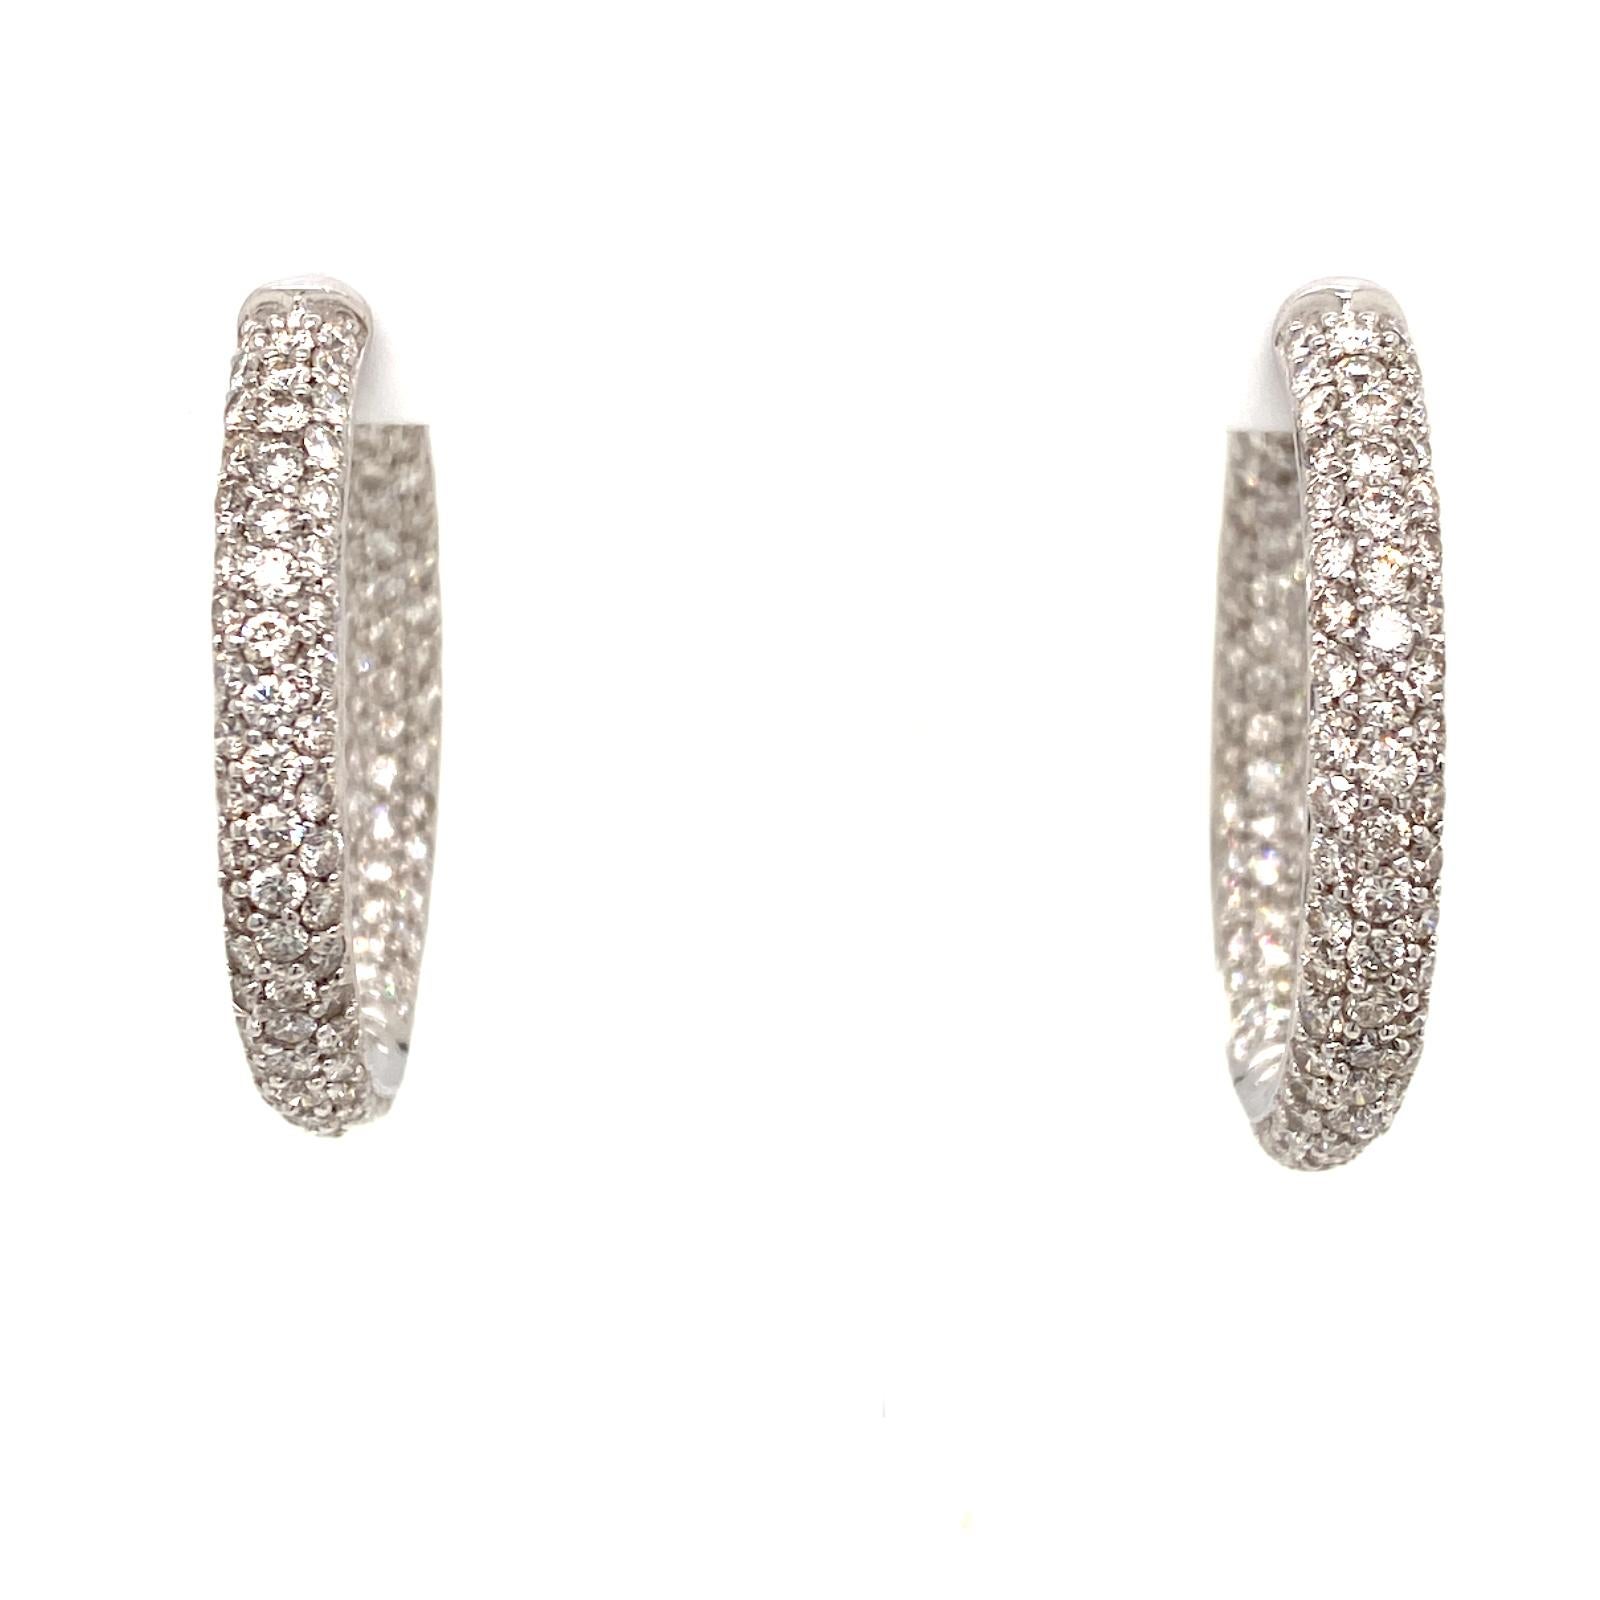 Beautiful diamond in & out hoop earrings fashioned in 18 karat white gold. The hoops feature 5.00 carats of round brilliant cut white diamonds graded G-H color and VS clarity. The hoops measure 1.25 inches in diameter, and 4.5mm in width